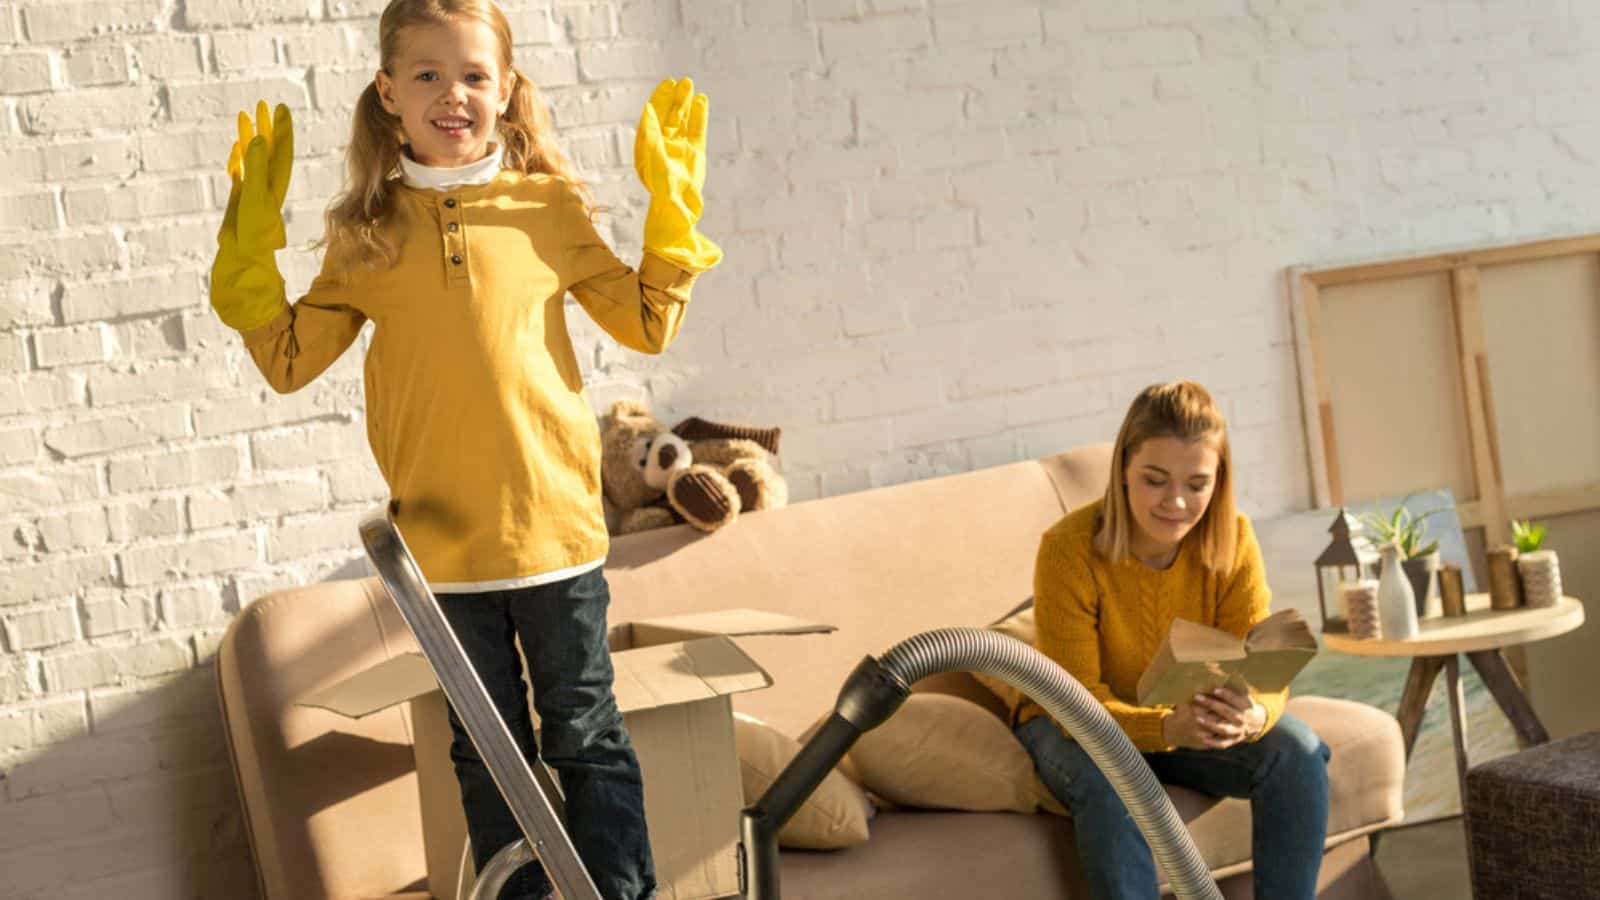 Child in rubber gloves smiling at camera while mother reading book on soda cleaning the house with vacuum